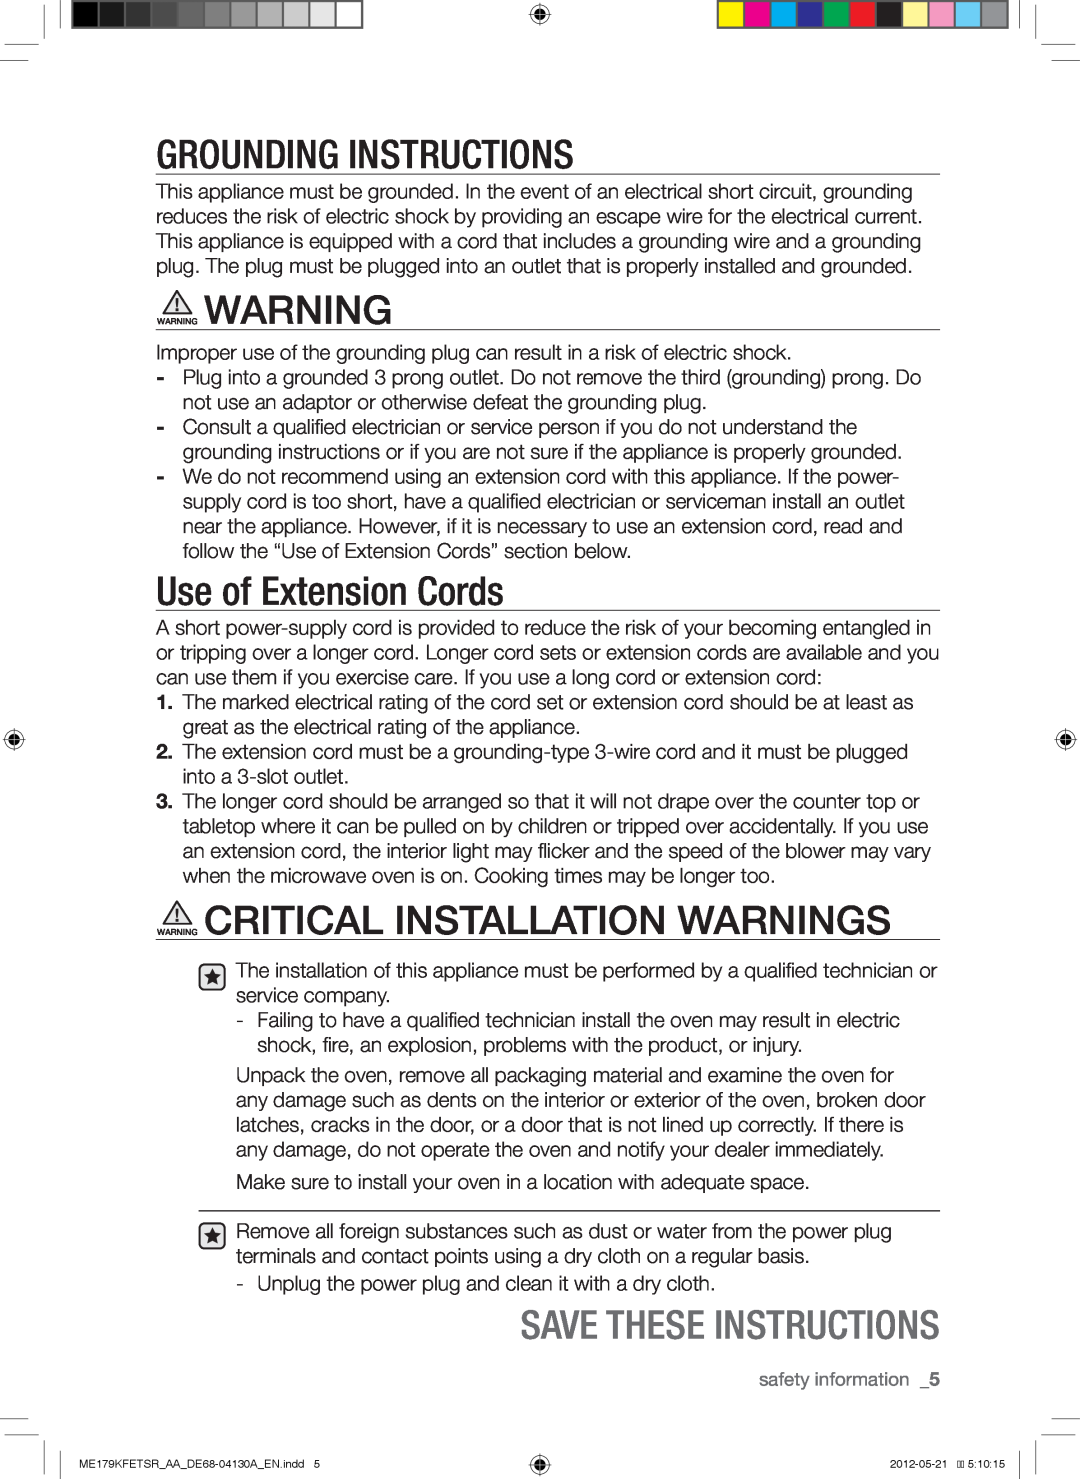 Samsung ME179KFETSR user manual Grounding Instructions, Use of Extension Cords, Warning Critical Installation Warnings 